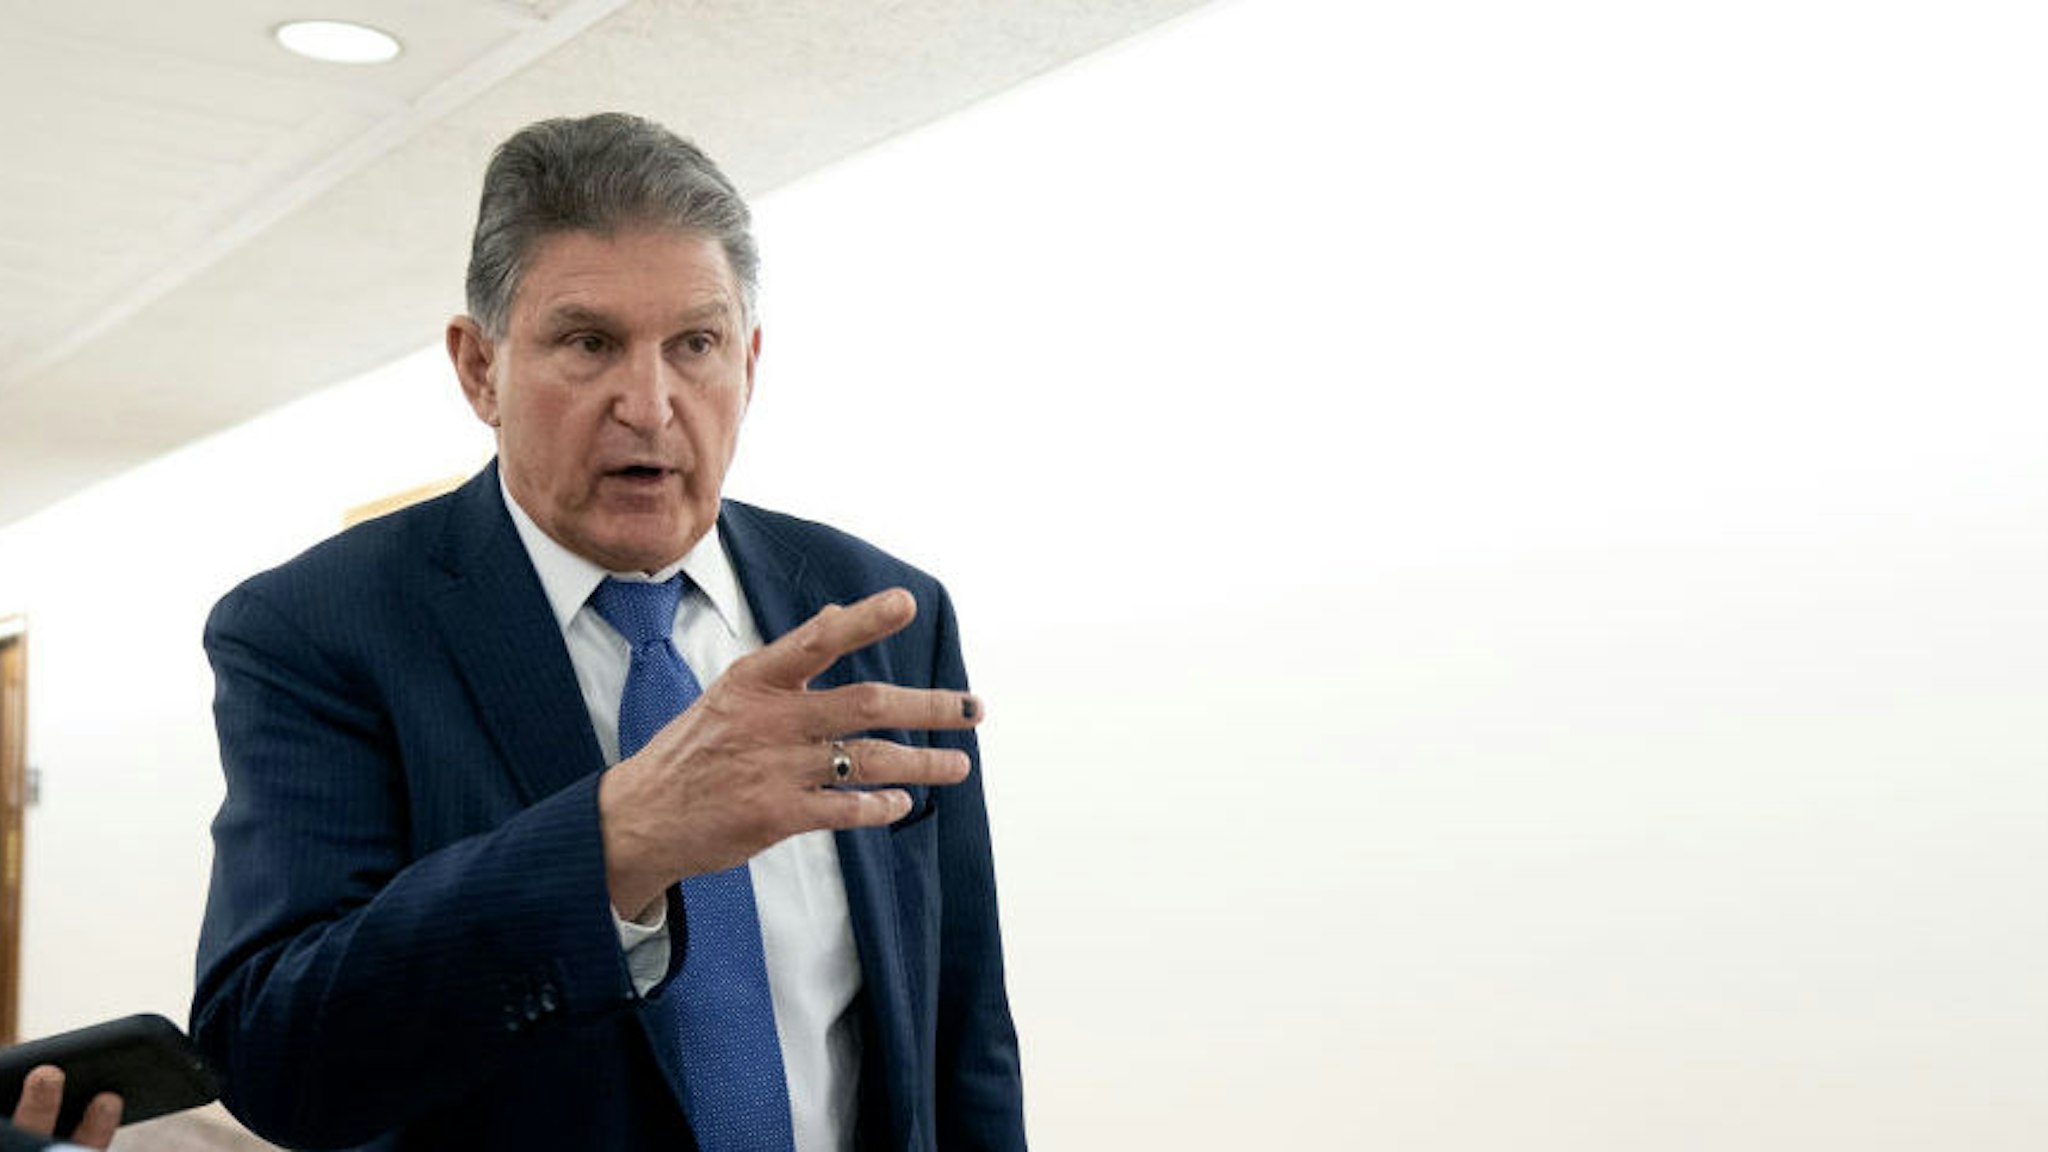 Senator Joe Manchin, a Democrat from West Virginia, speaks to members of the media while departing a bipartisan Senate luncheon in Dirksen Senate Office Building in Washington, D.C., U.S., on Wednesday, March 3, 2021. President Biden's imperative of swiftly passing his $1.9 trillion pandemic-relief program faces one of its final hurdles, settling disputes among Senate Democrats over how to ensure aid gets to those who truly need it.